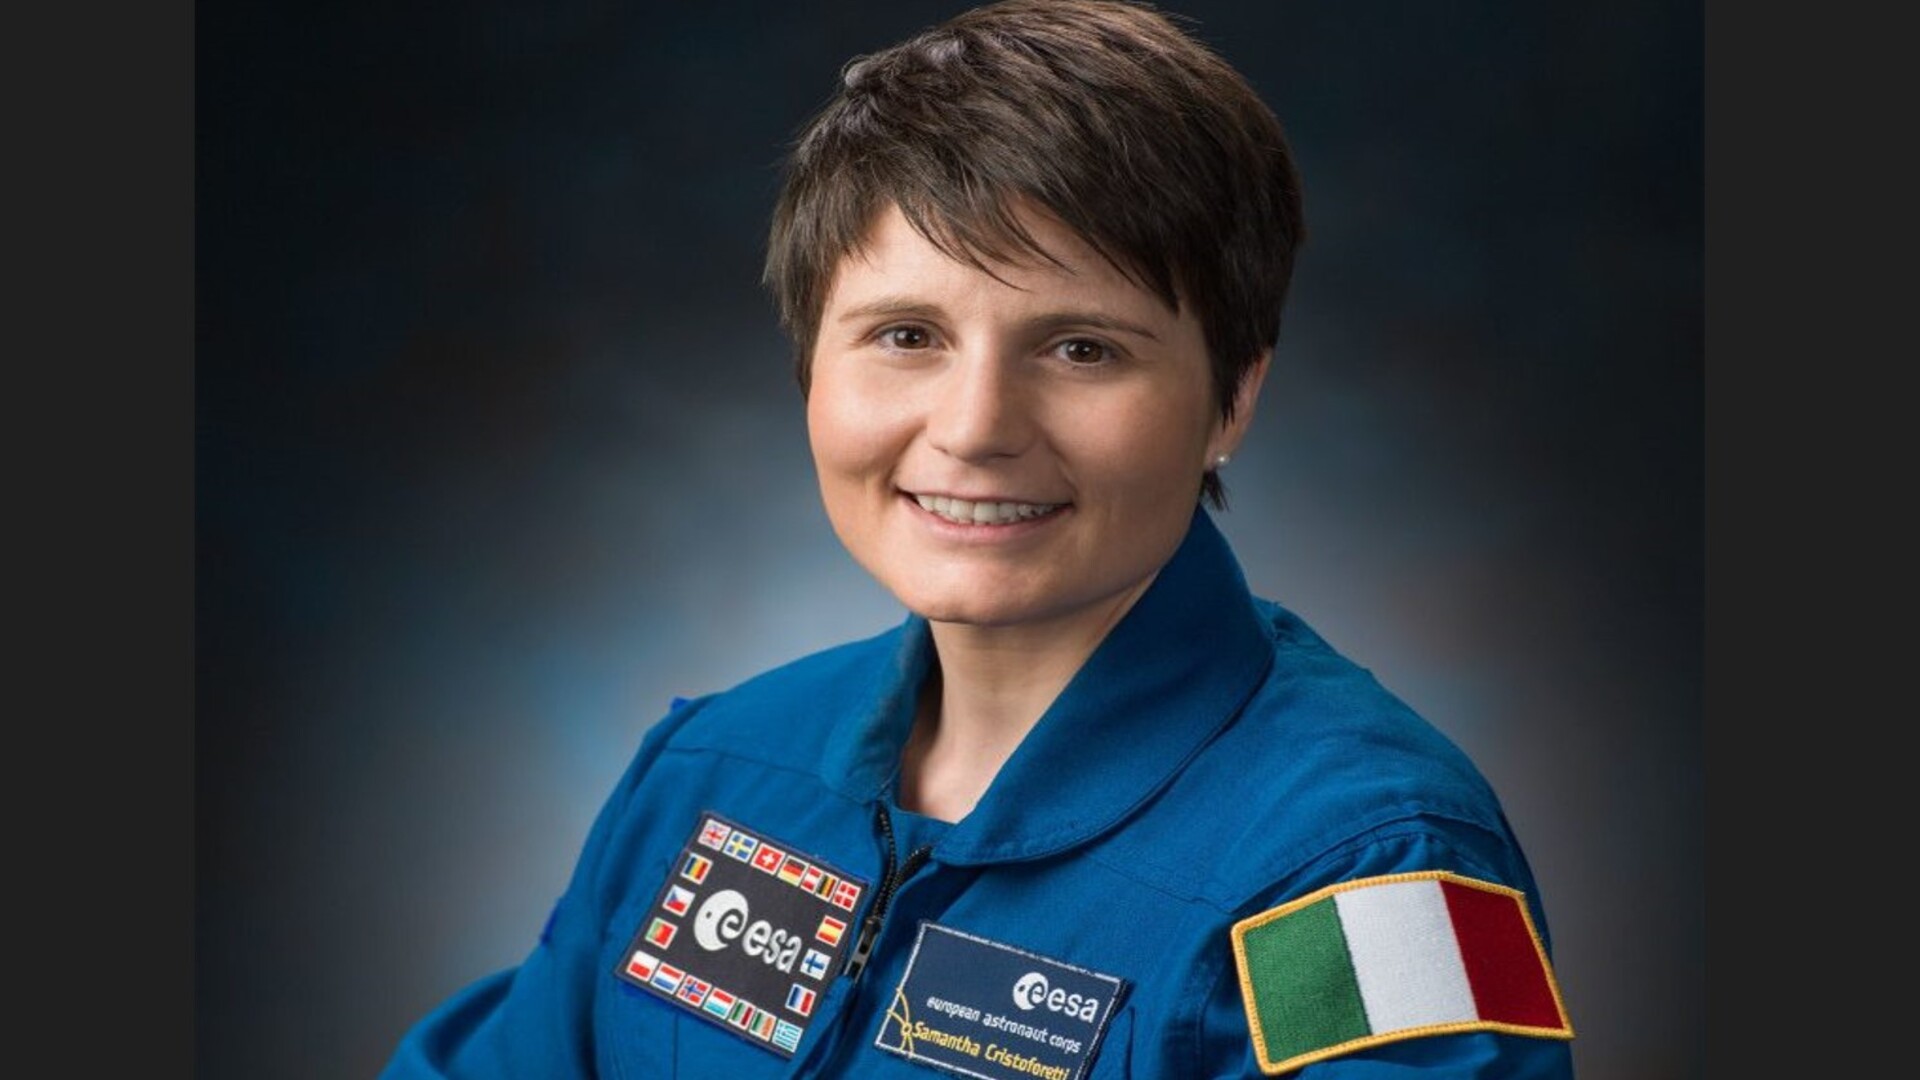 SAMANTHA CRISTOFORETTI WILL BE THE COMMANDER OF THE ISS